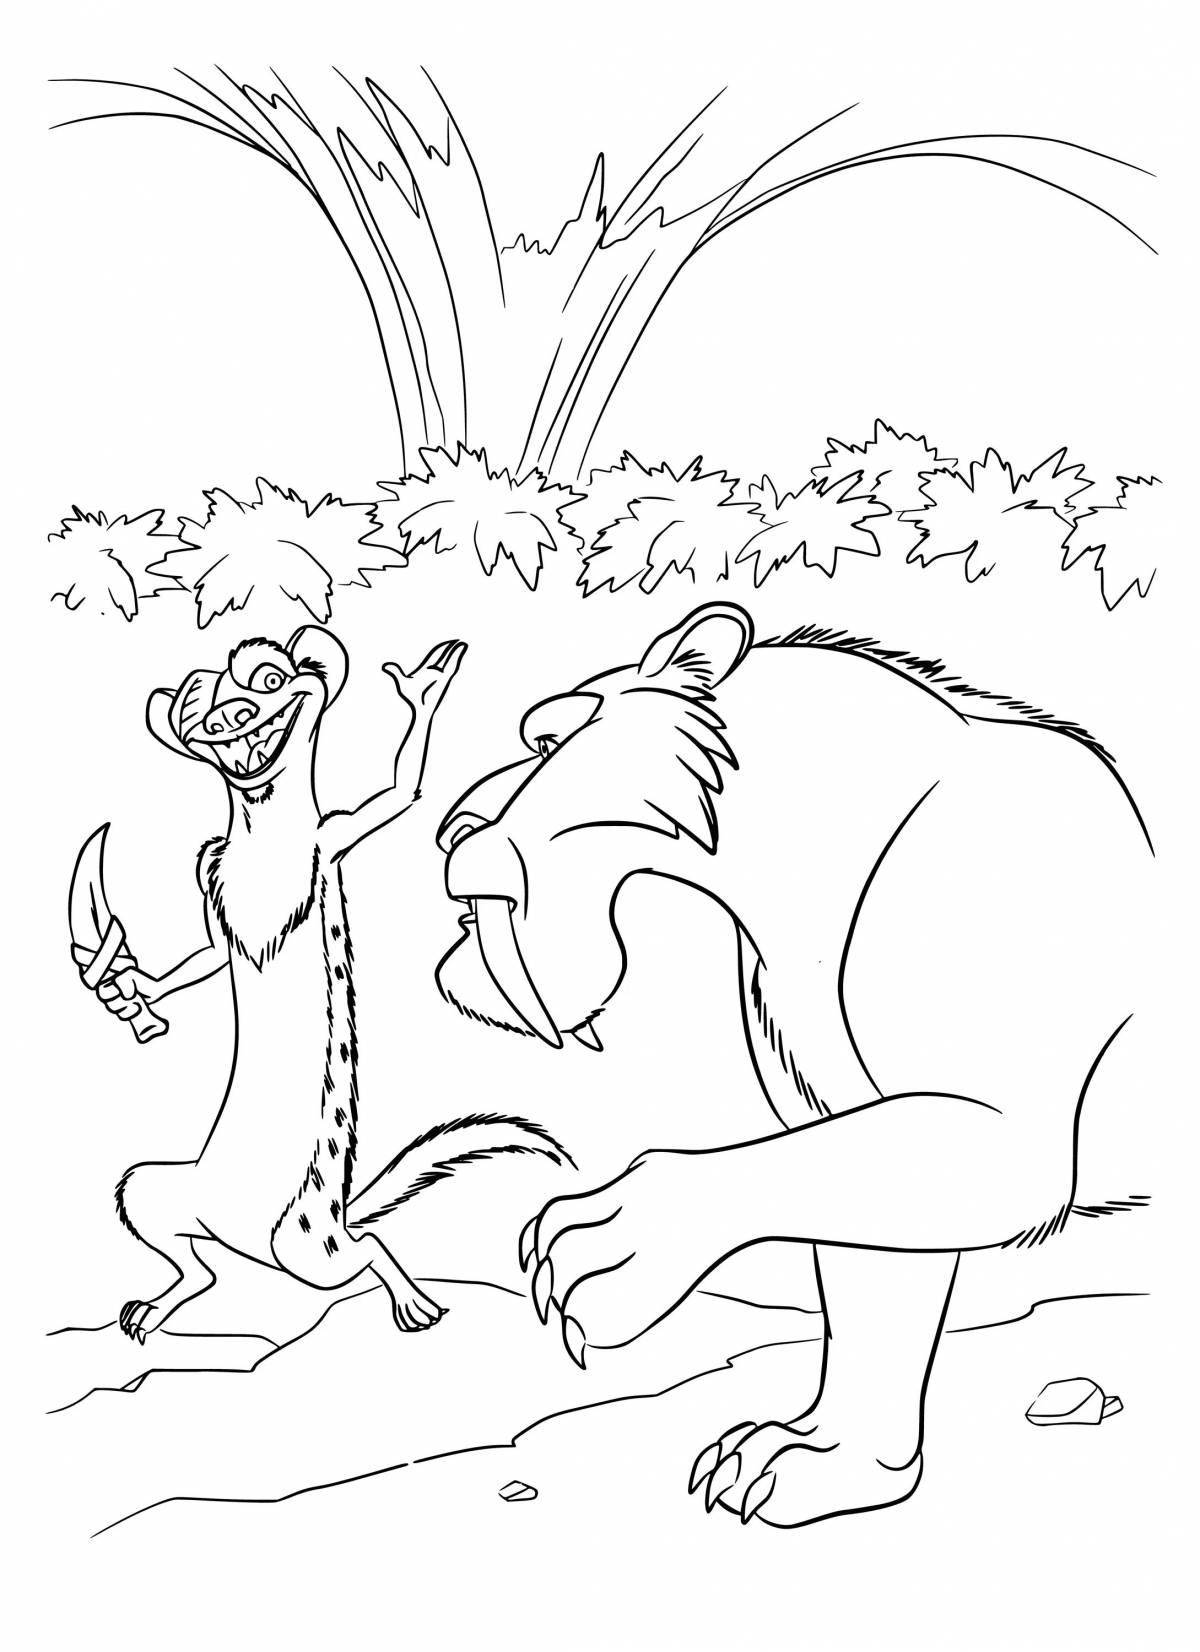 Colorful ice age coloring page